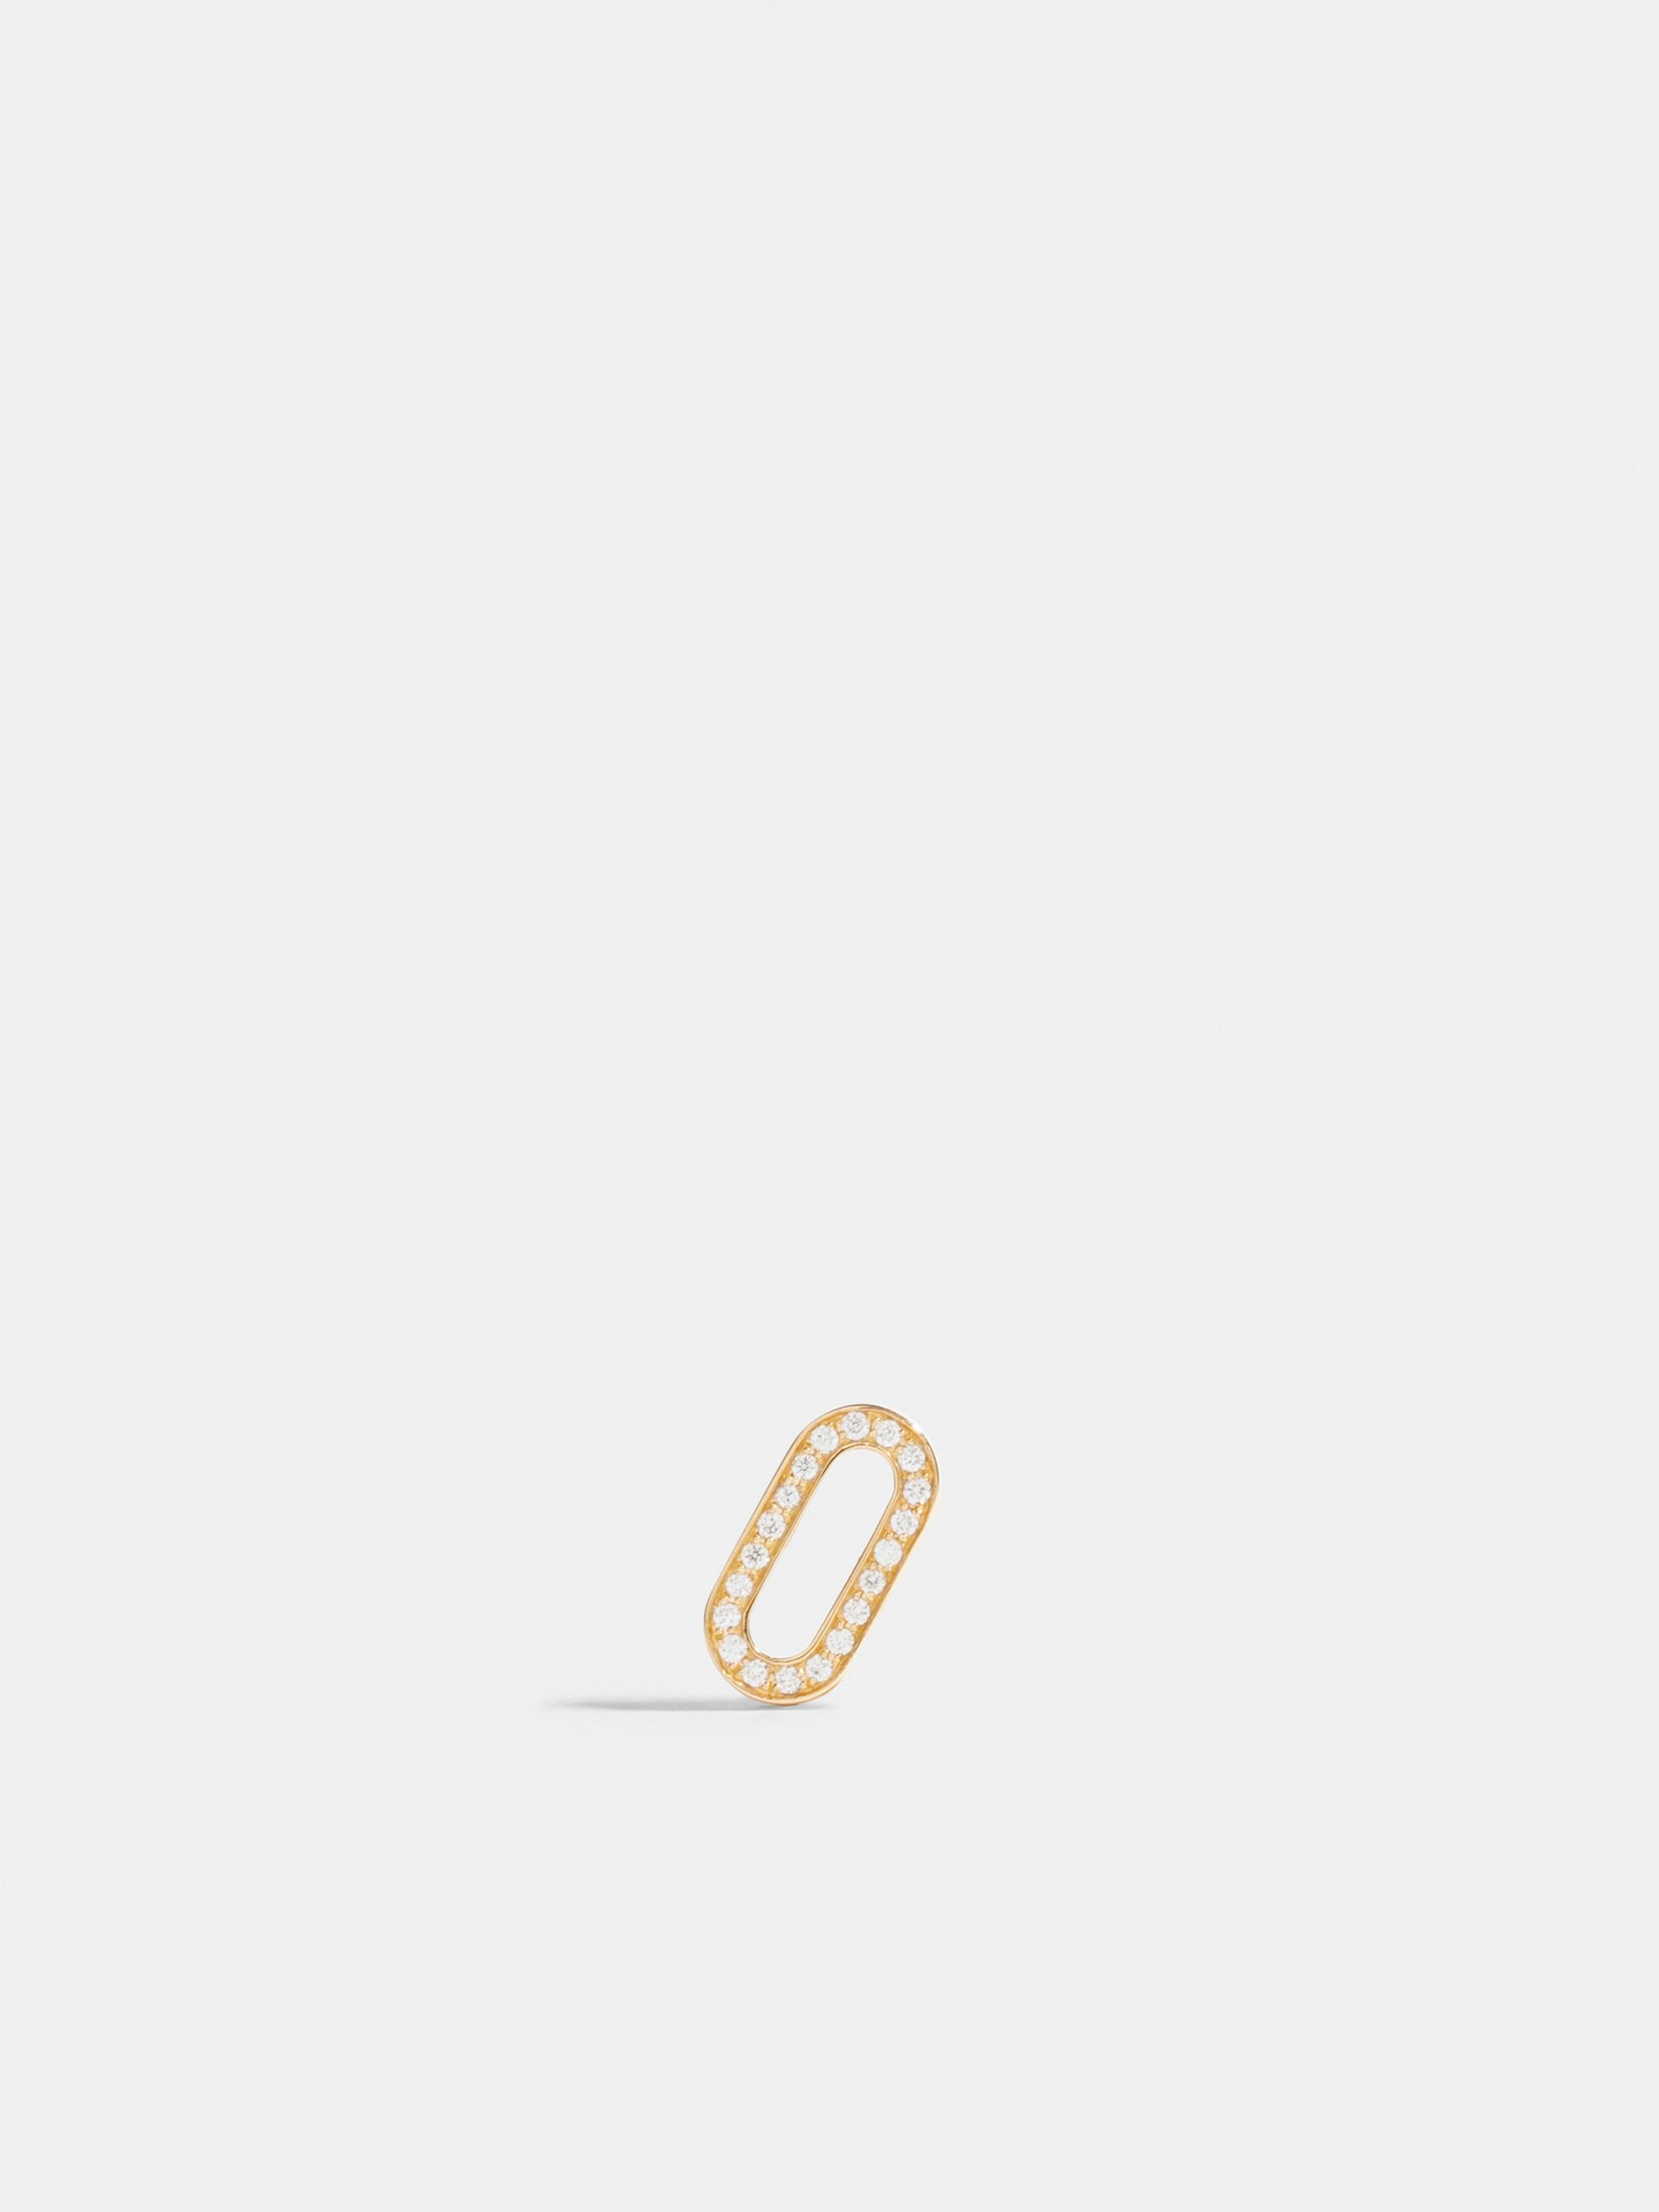 Étreintes ear clip paved in 18k Fairmined ethical yellow gold, paved with lab-grown diamonds, the unity. 